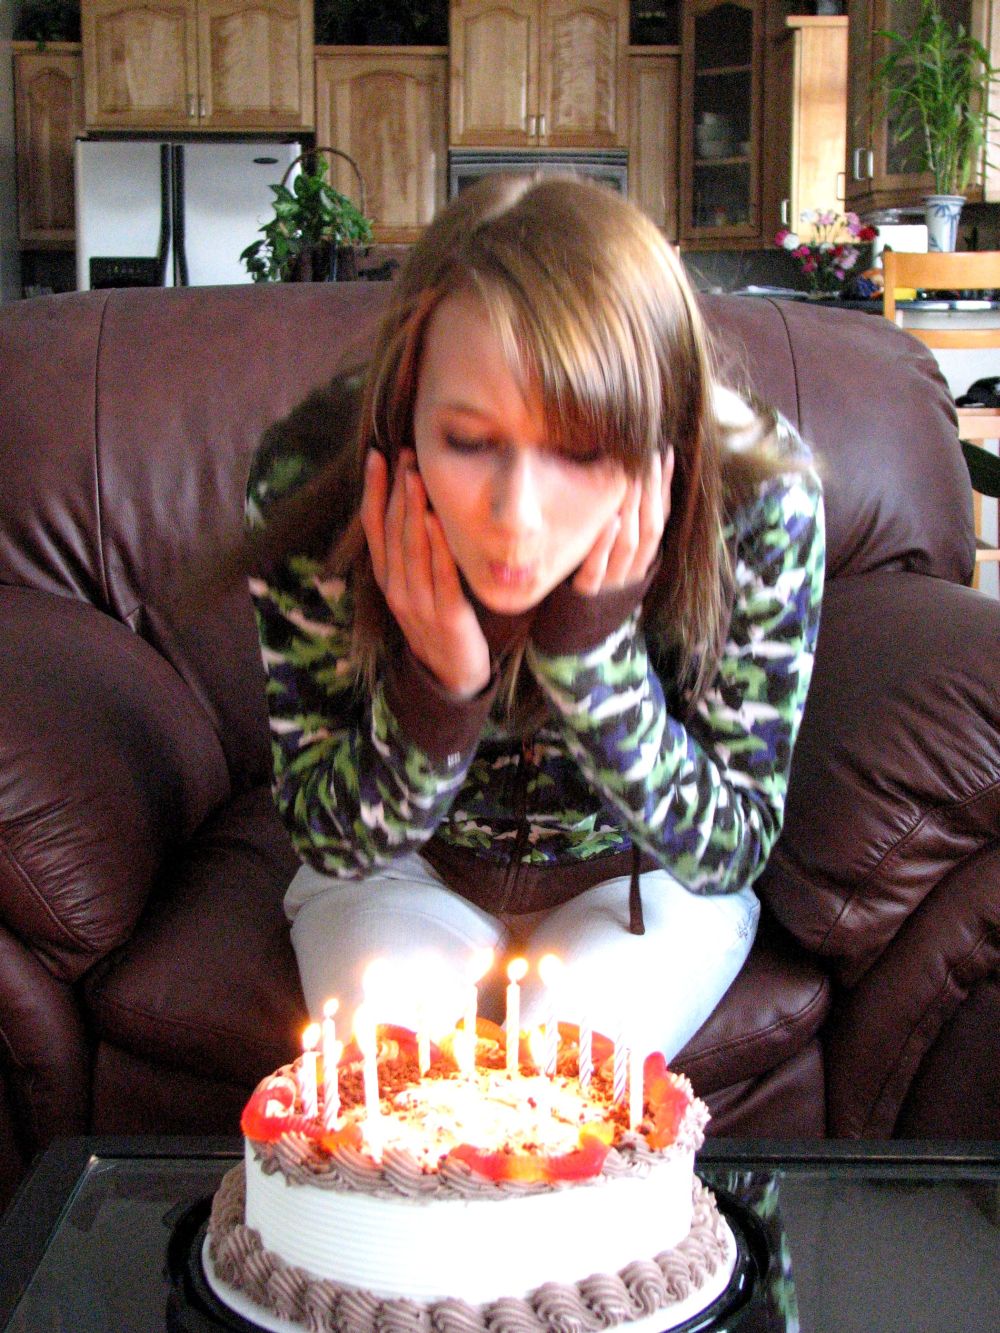 [Paige+blowing+out+candles+resized.jpg]